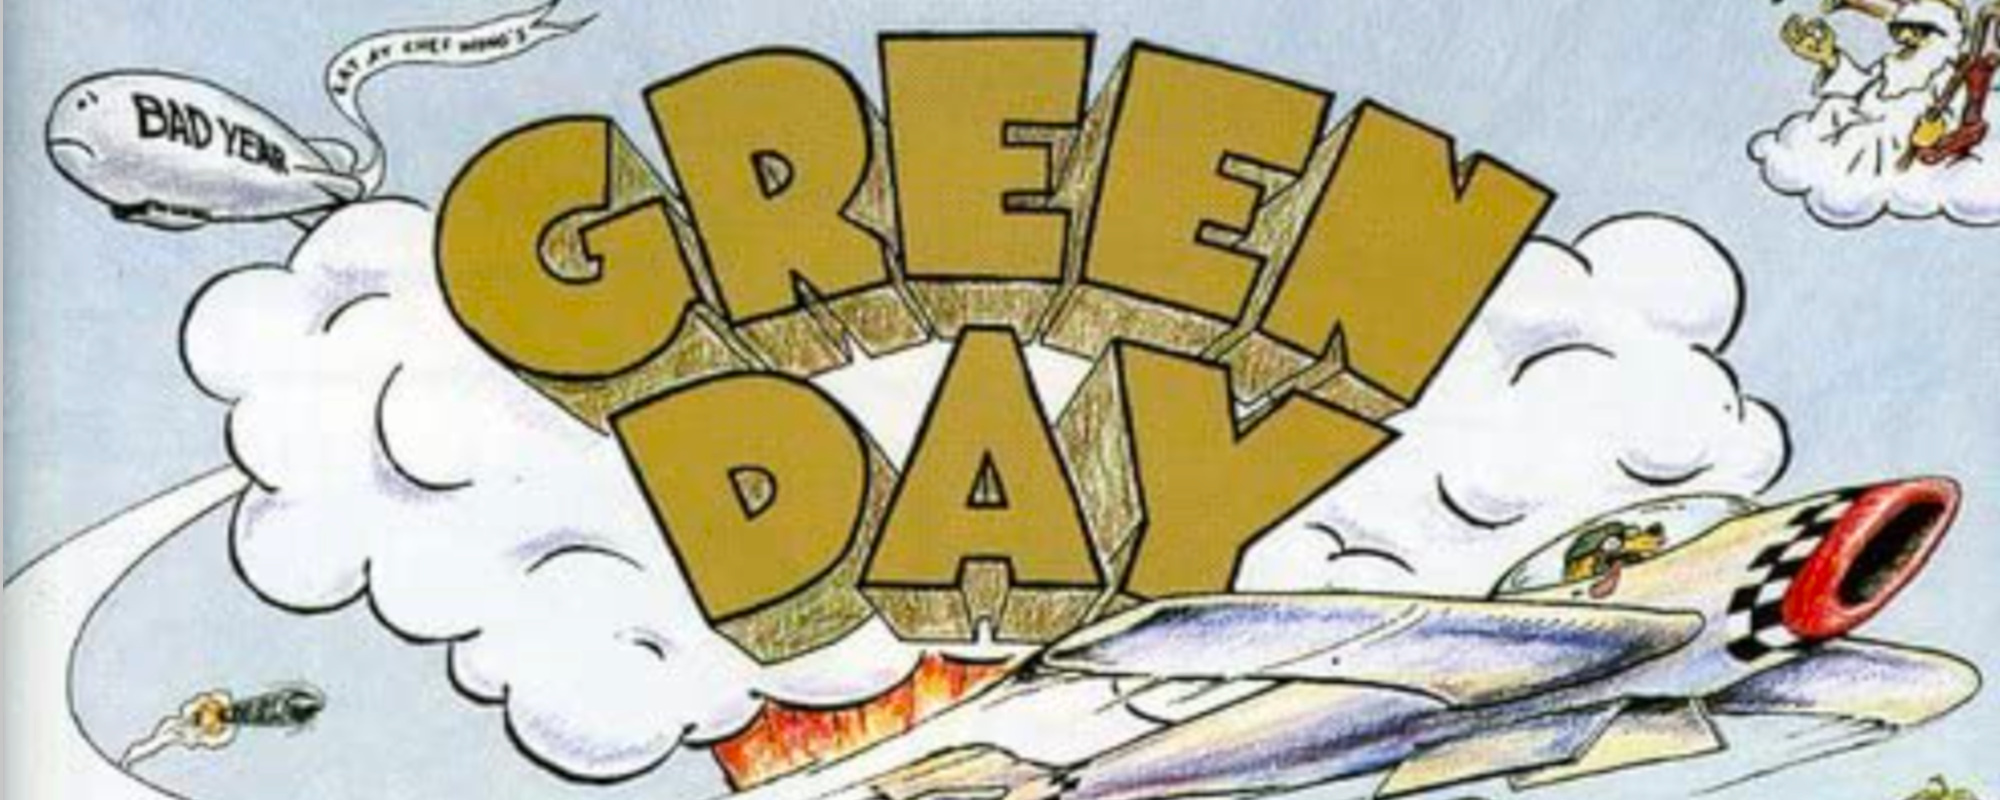 The Story Behind Green Day’s ‘Where’s Waldo’-Like Album Cover for ‘Dookie’